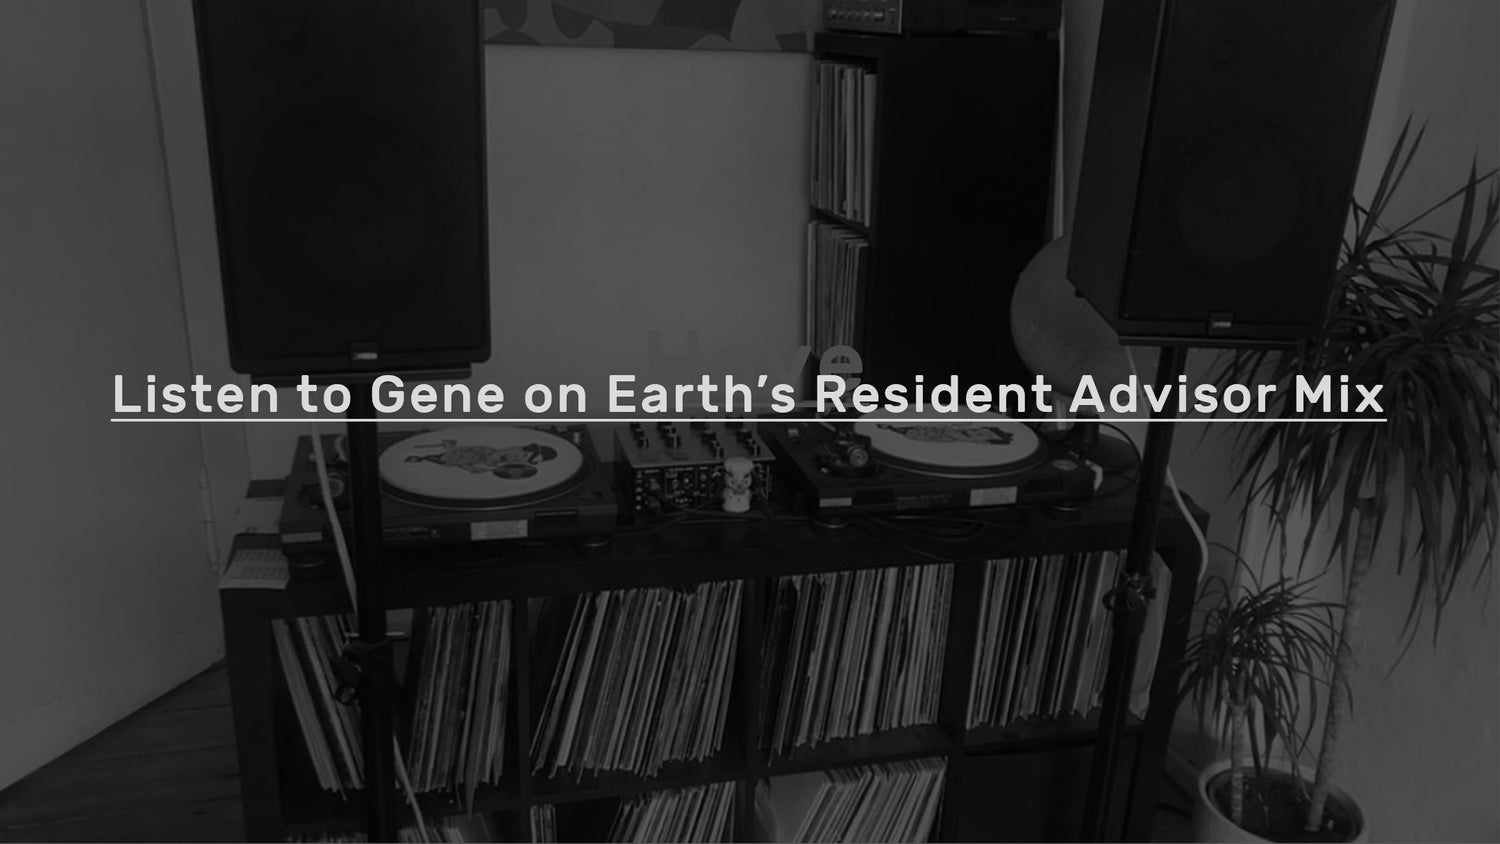 Gene On Earth provides the latest instalment of the RA mix series recorded on his Radius 2 - MasterSounds